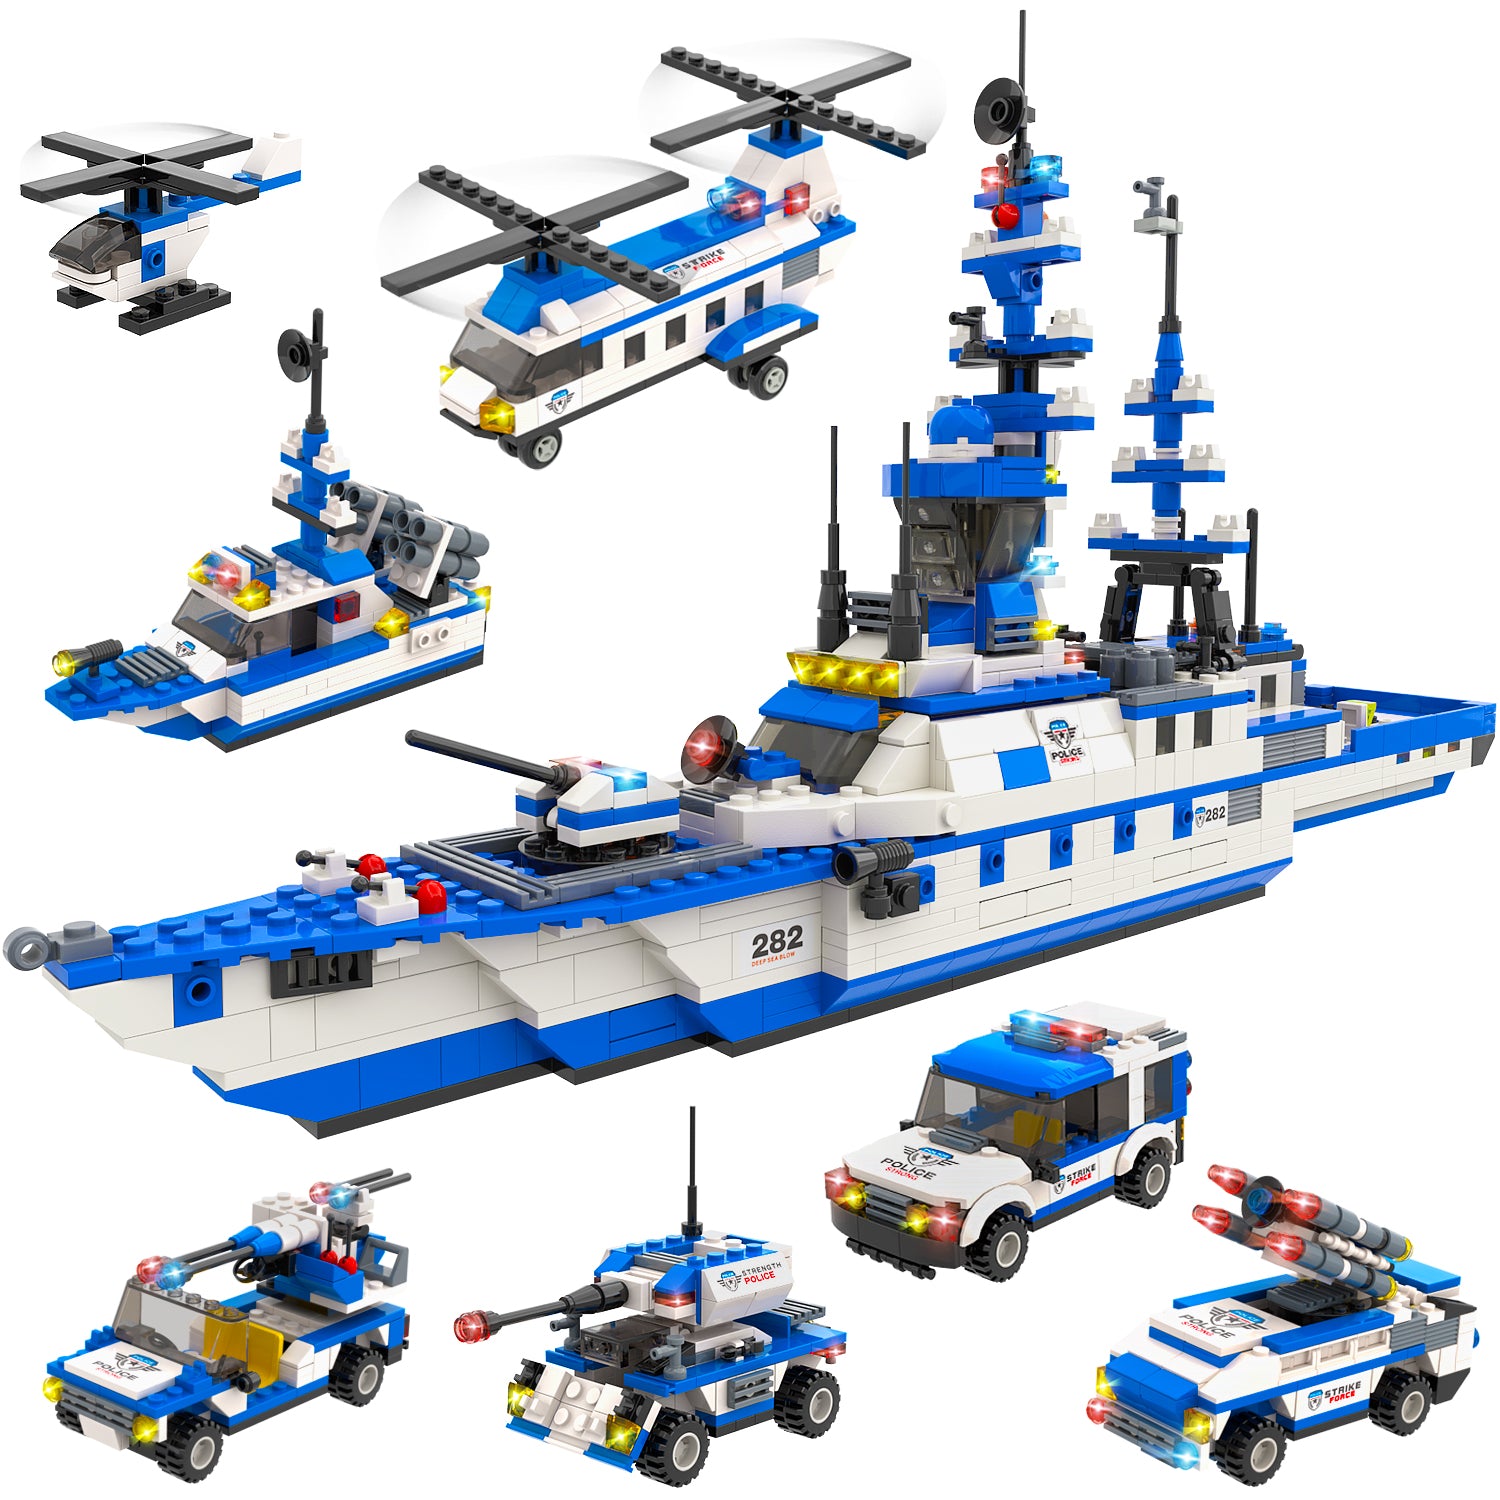 Ocean Military Battleship Building Block 6 IN 1 Military Battleship Building Toy Model Kit Best STEM Educational Toy Gift for Boys and Girls up 6 Ages With 1169 Pieces